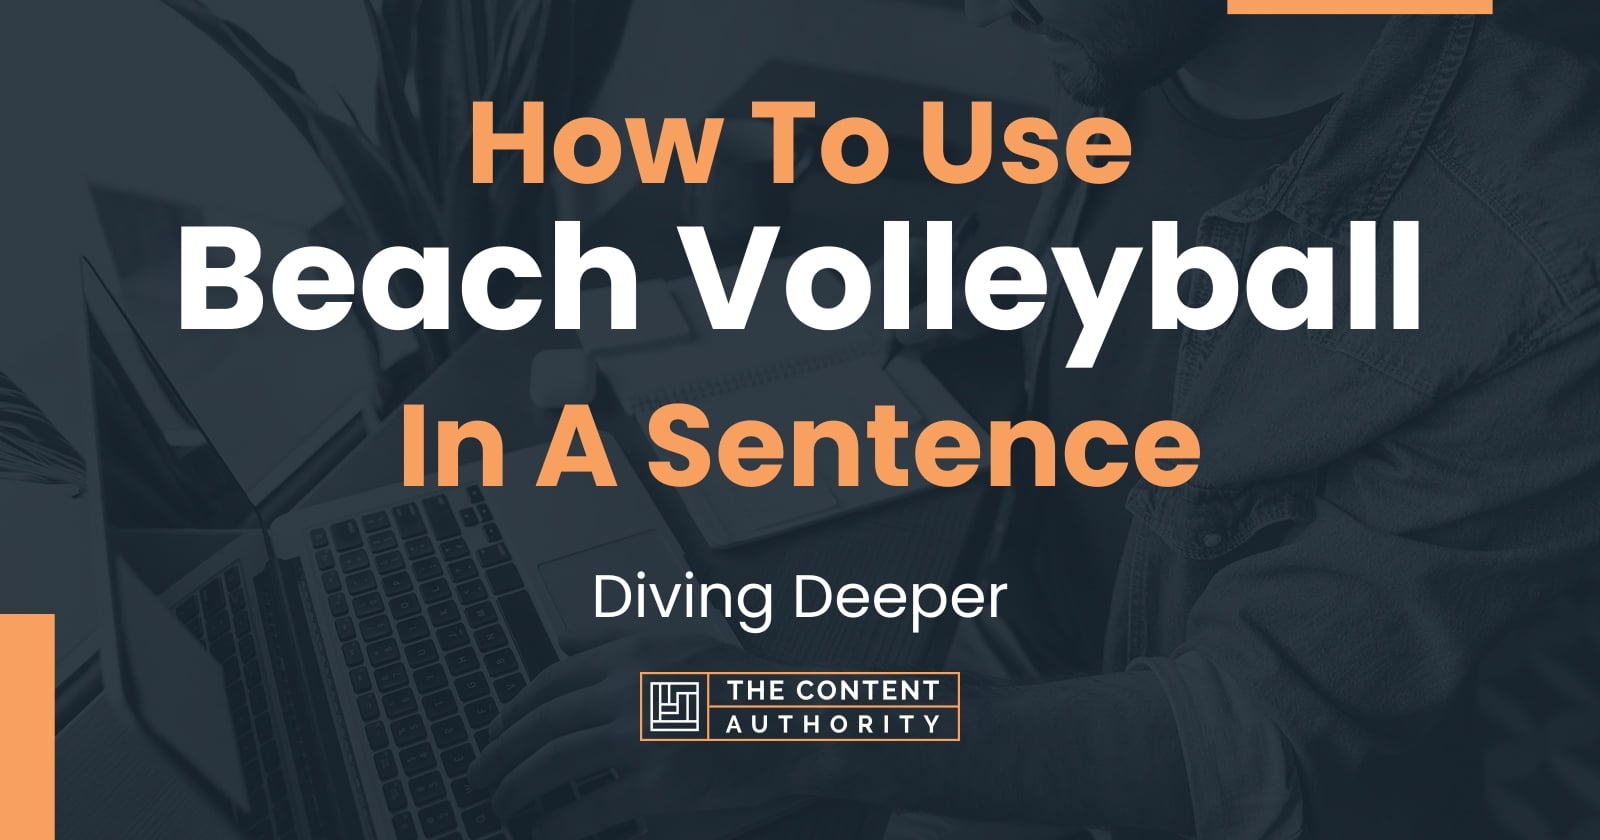 How To Use Beach Volleyball In A Sentence 